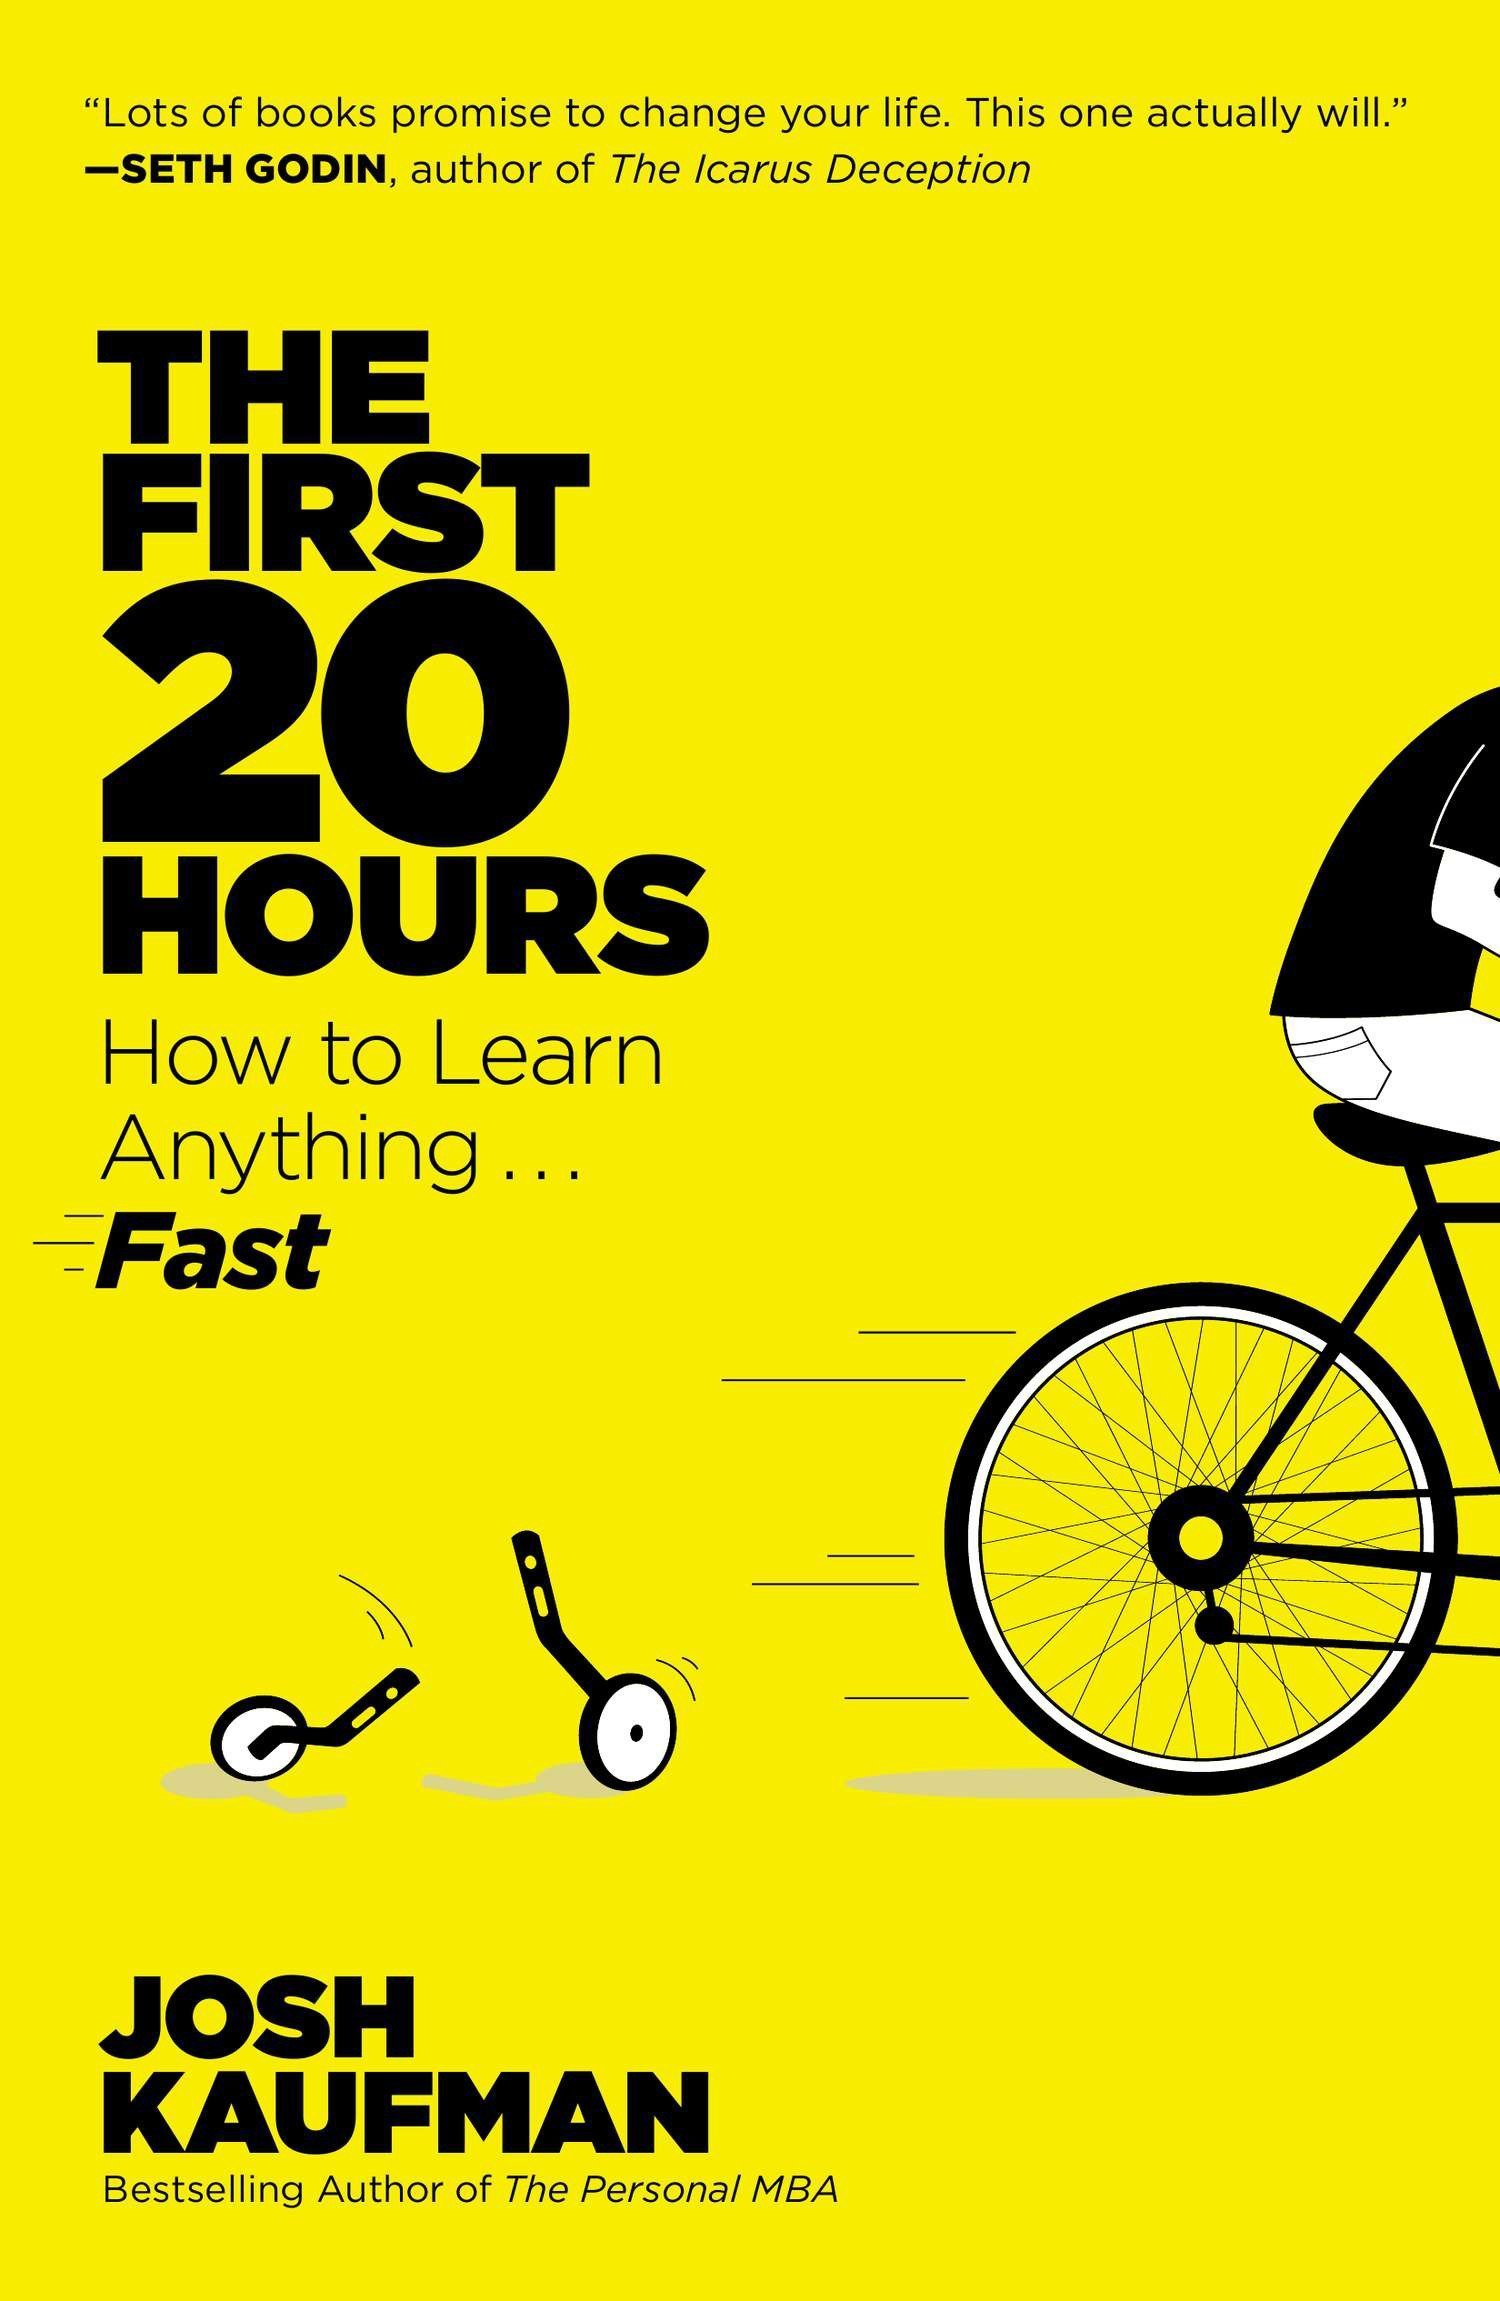 The First 20 Hours: How to Learn Anything...Fast